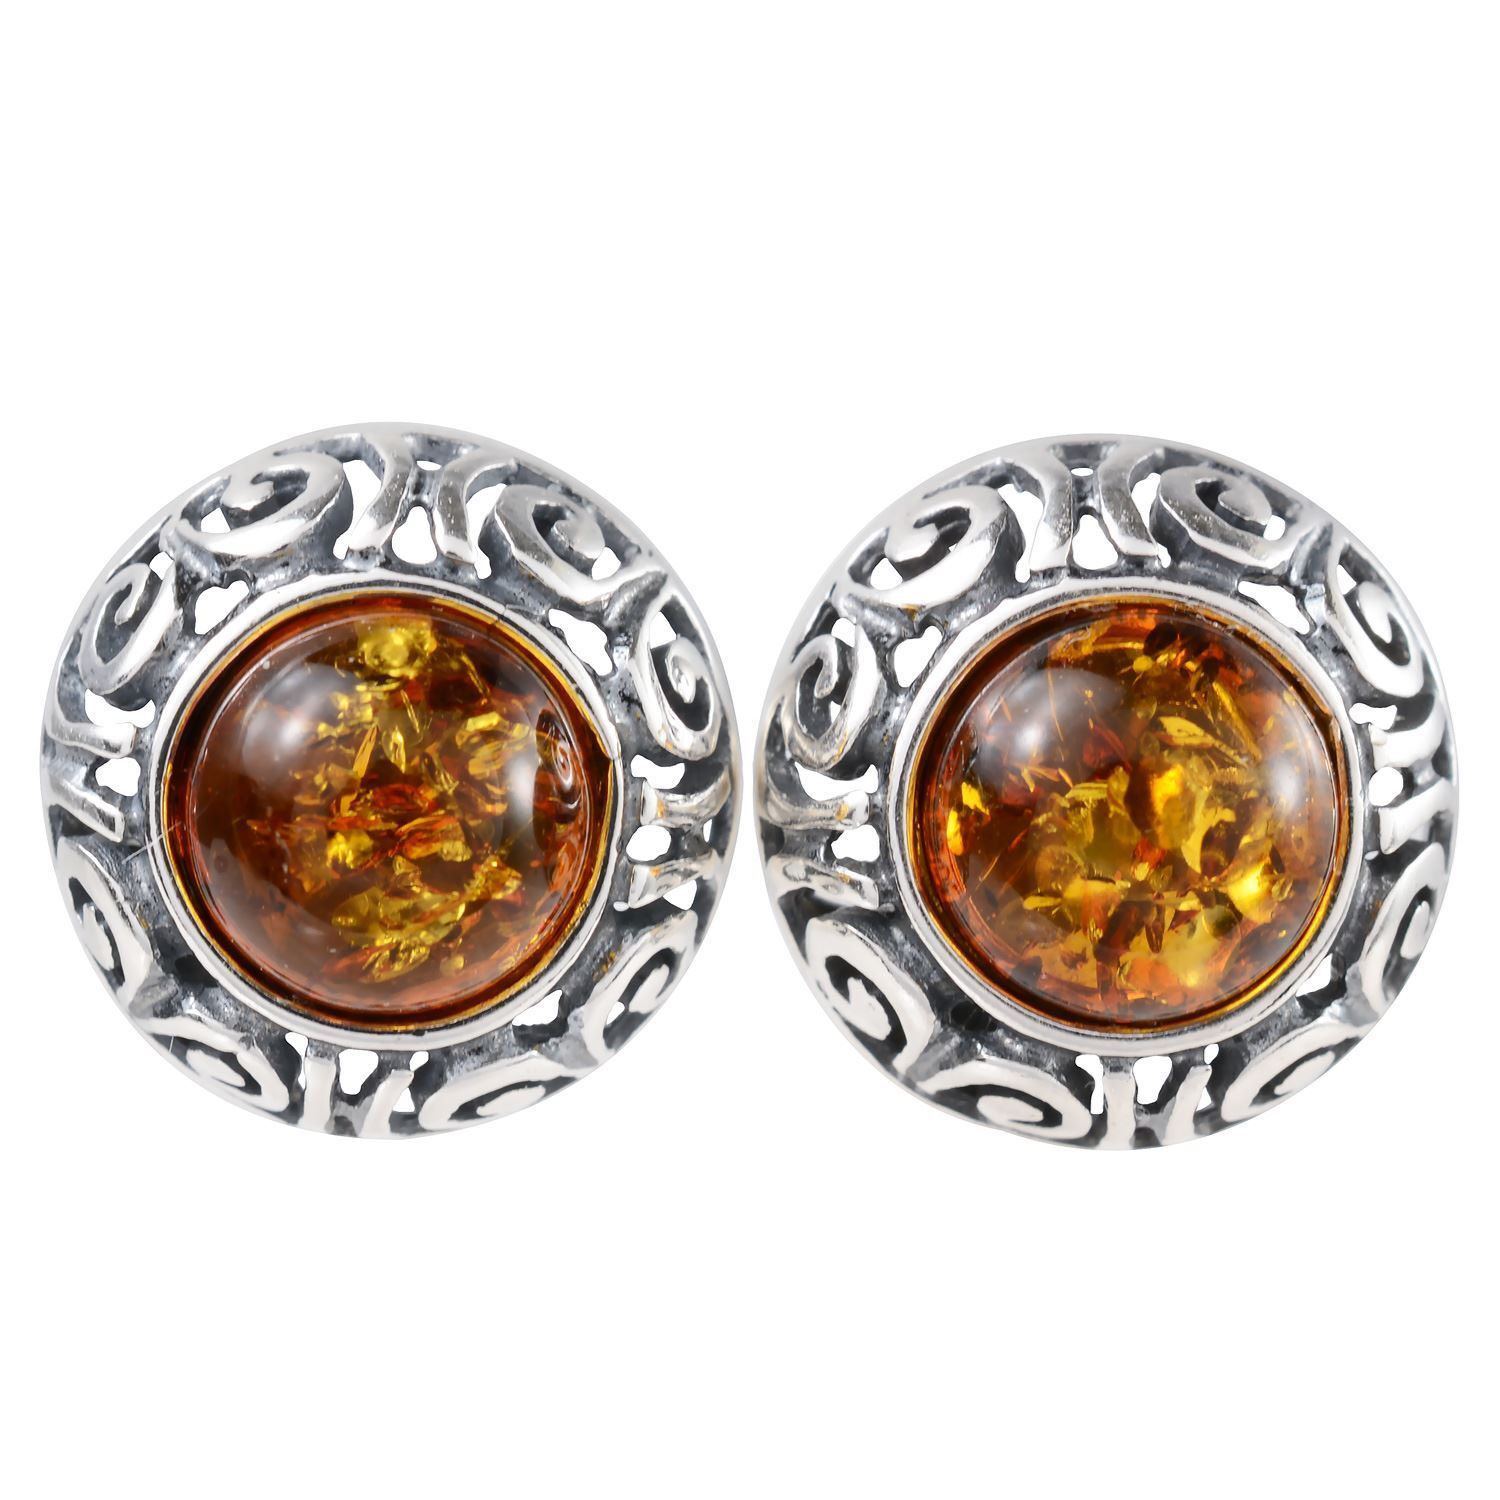 Honey Amber and Yellow amber Details about   Baltic Amber earrings-A shade of Amber Cognc Amber